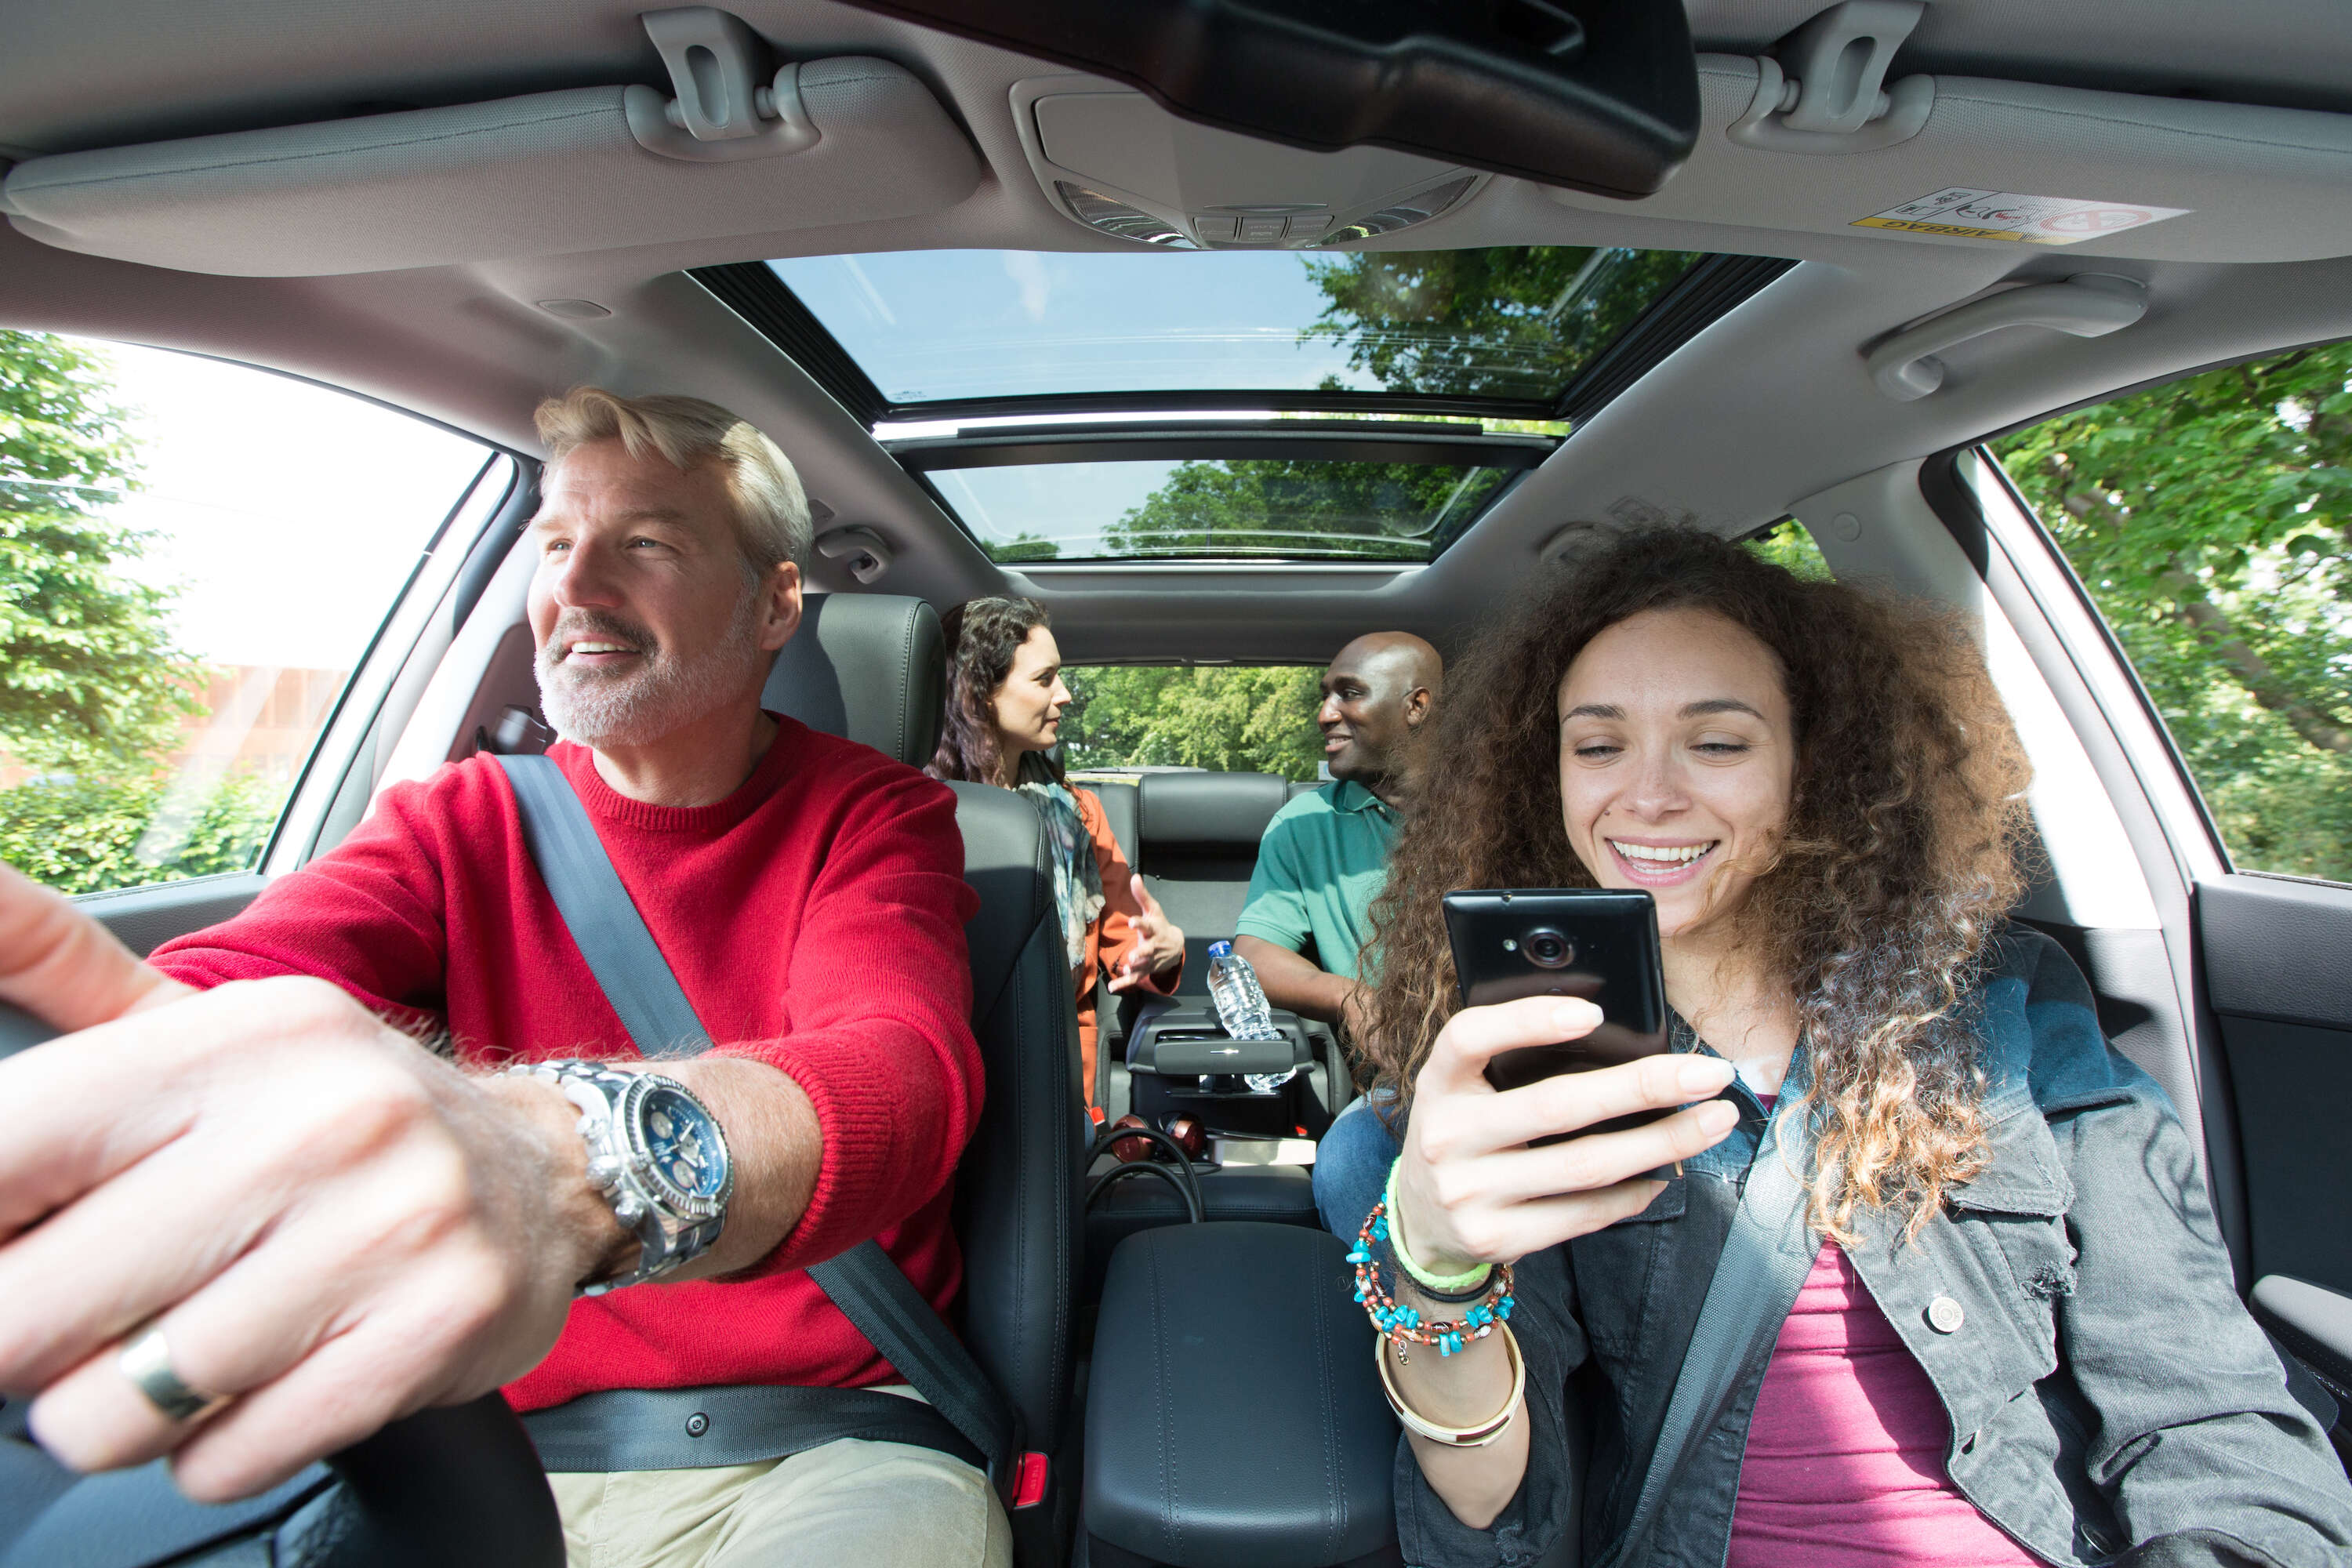 group of people riding together in car using blablacar